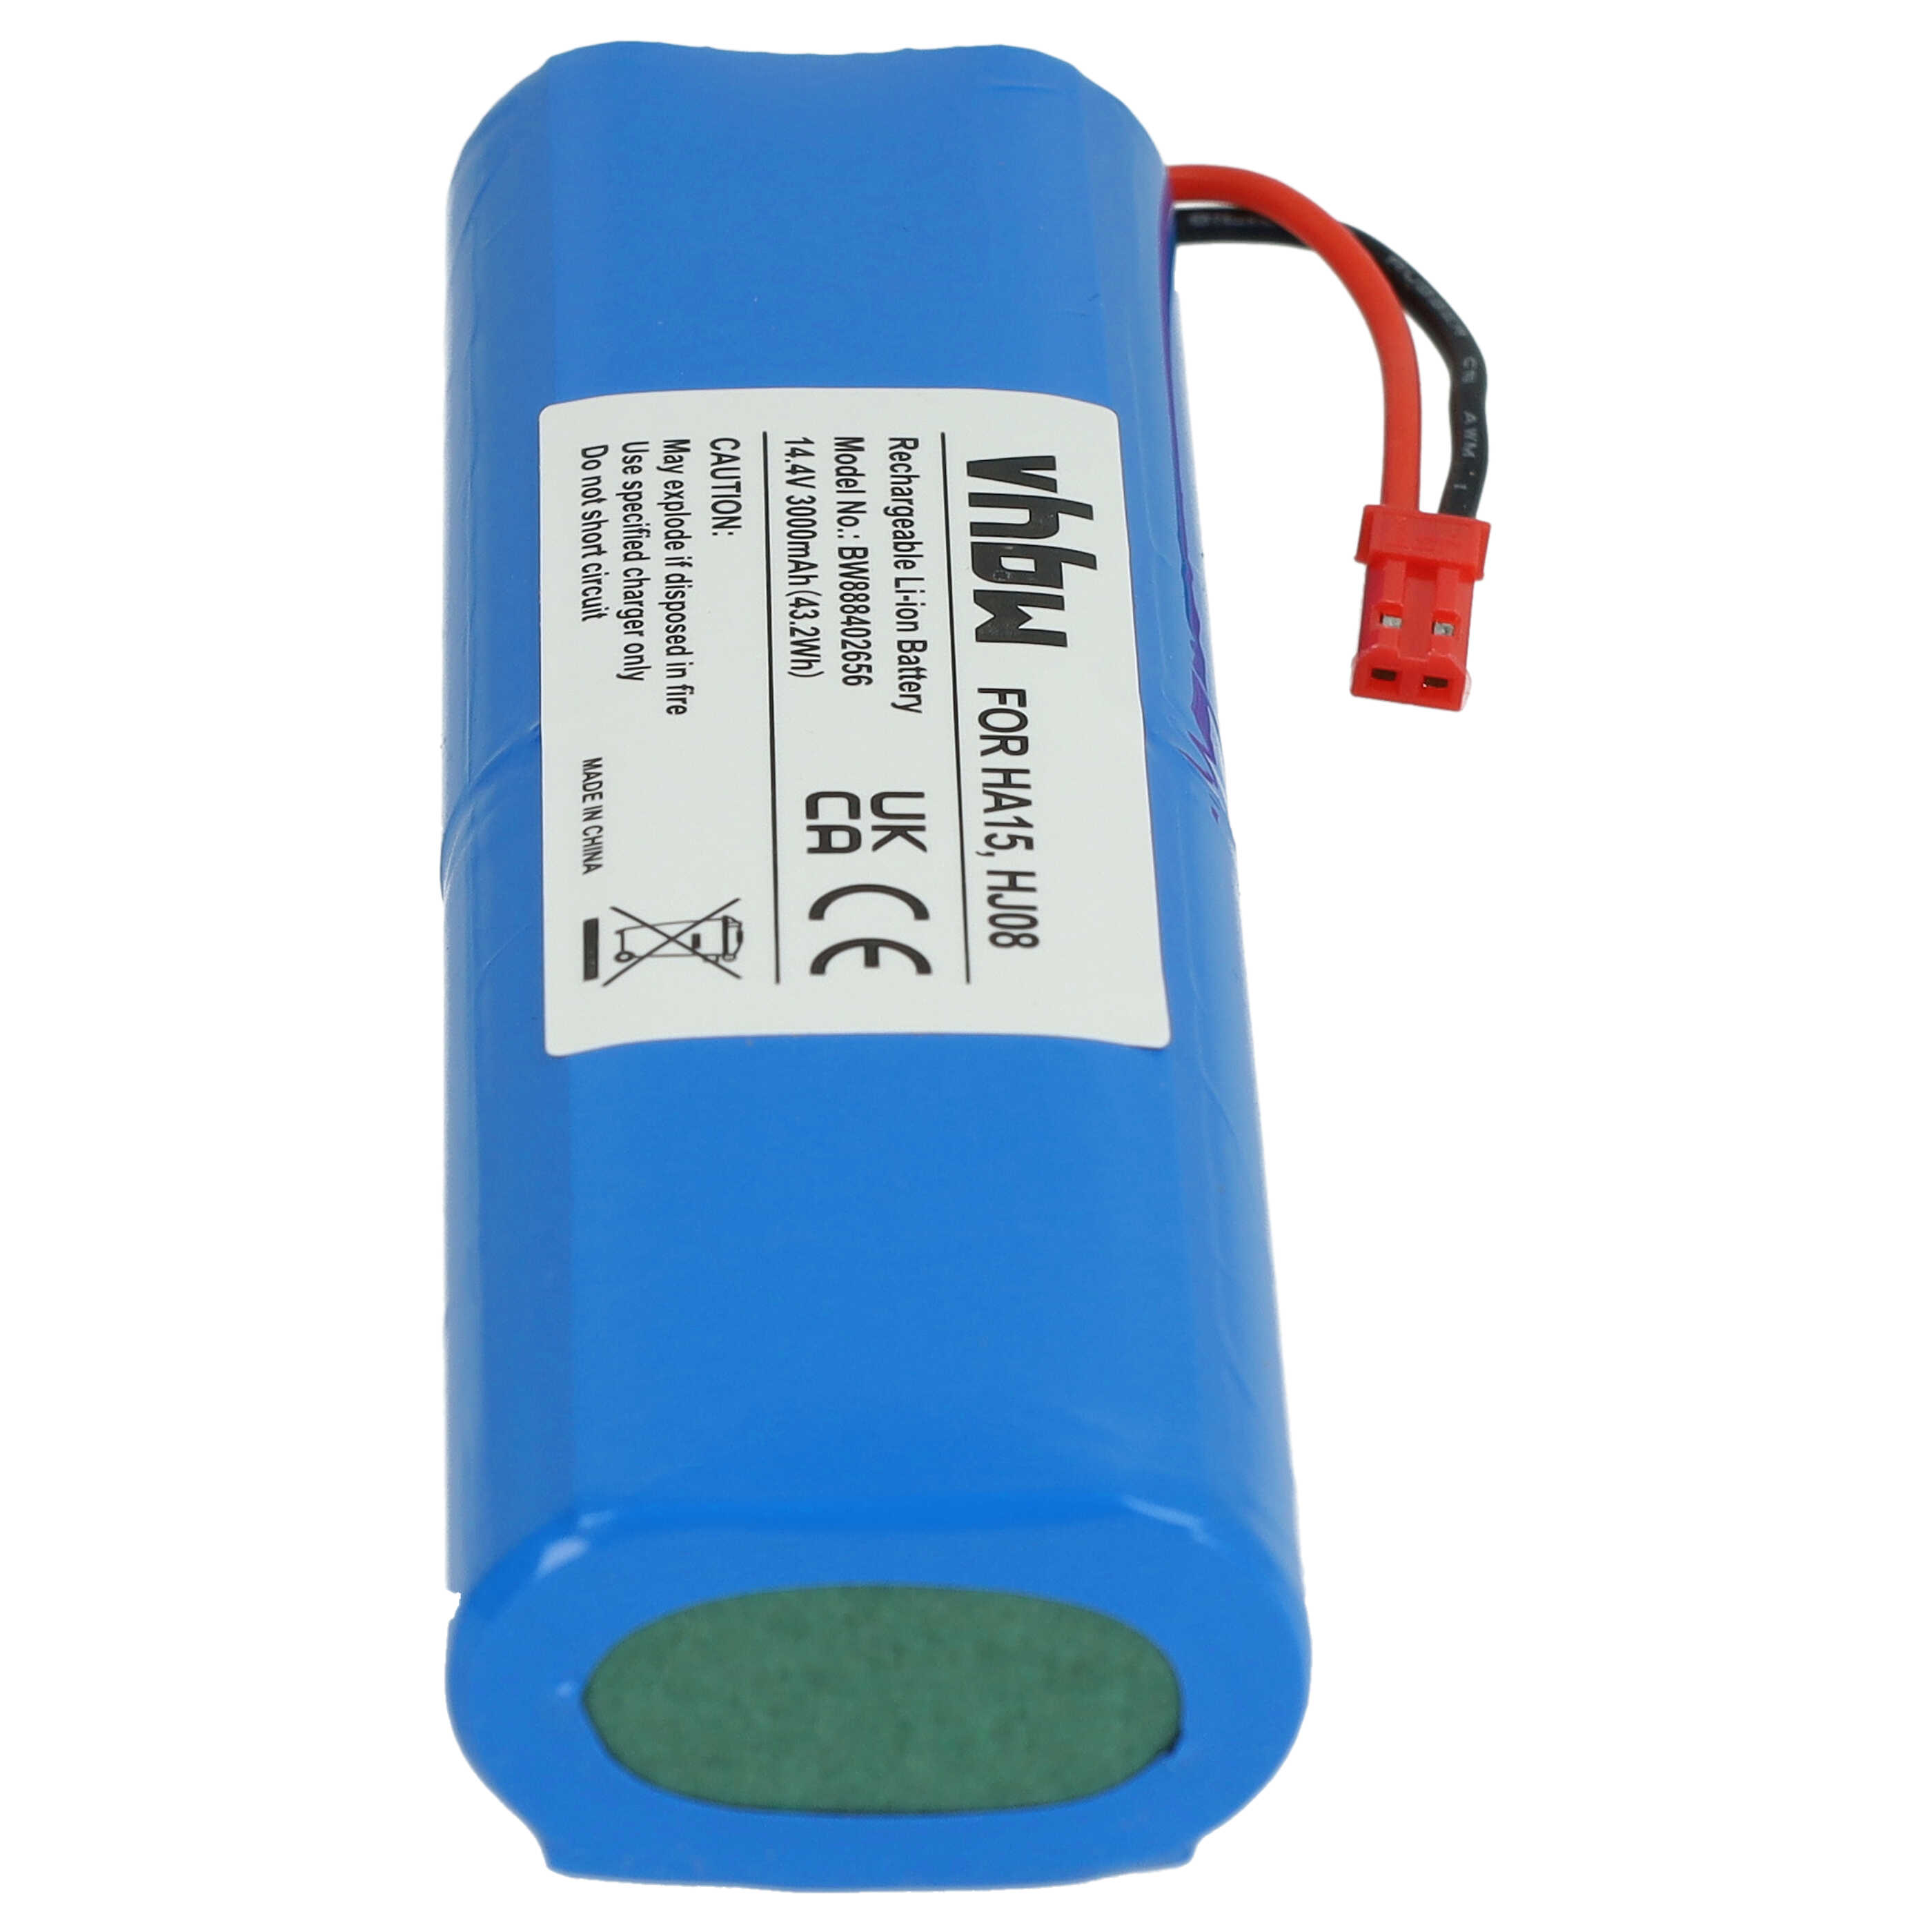 Battery Replacement for iLife Ay-18650B4, 18650B4-4S1P-AGX-2, SUN-INTE-202 for - 3000mAh, 14.4V, Li-Ion